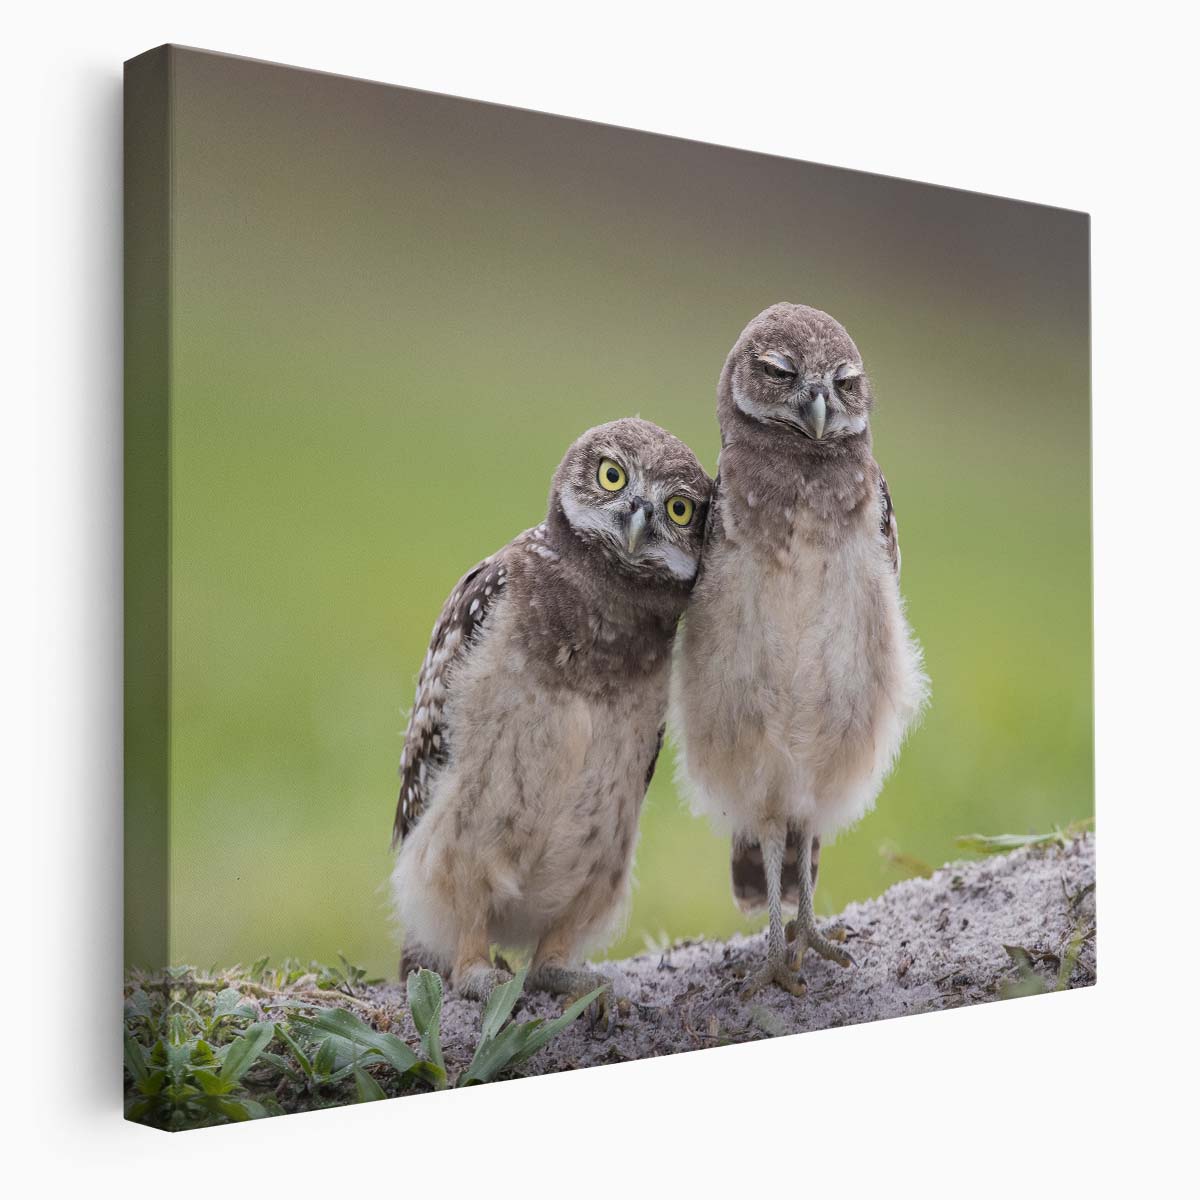 Adorable Owl Siblings Embrace Wildlife Wall Art by Luxuriance Designs. Made in USA.